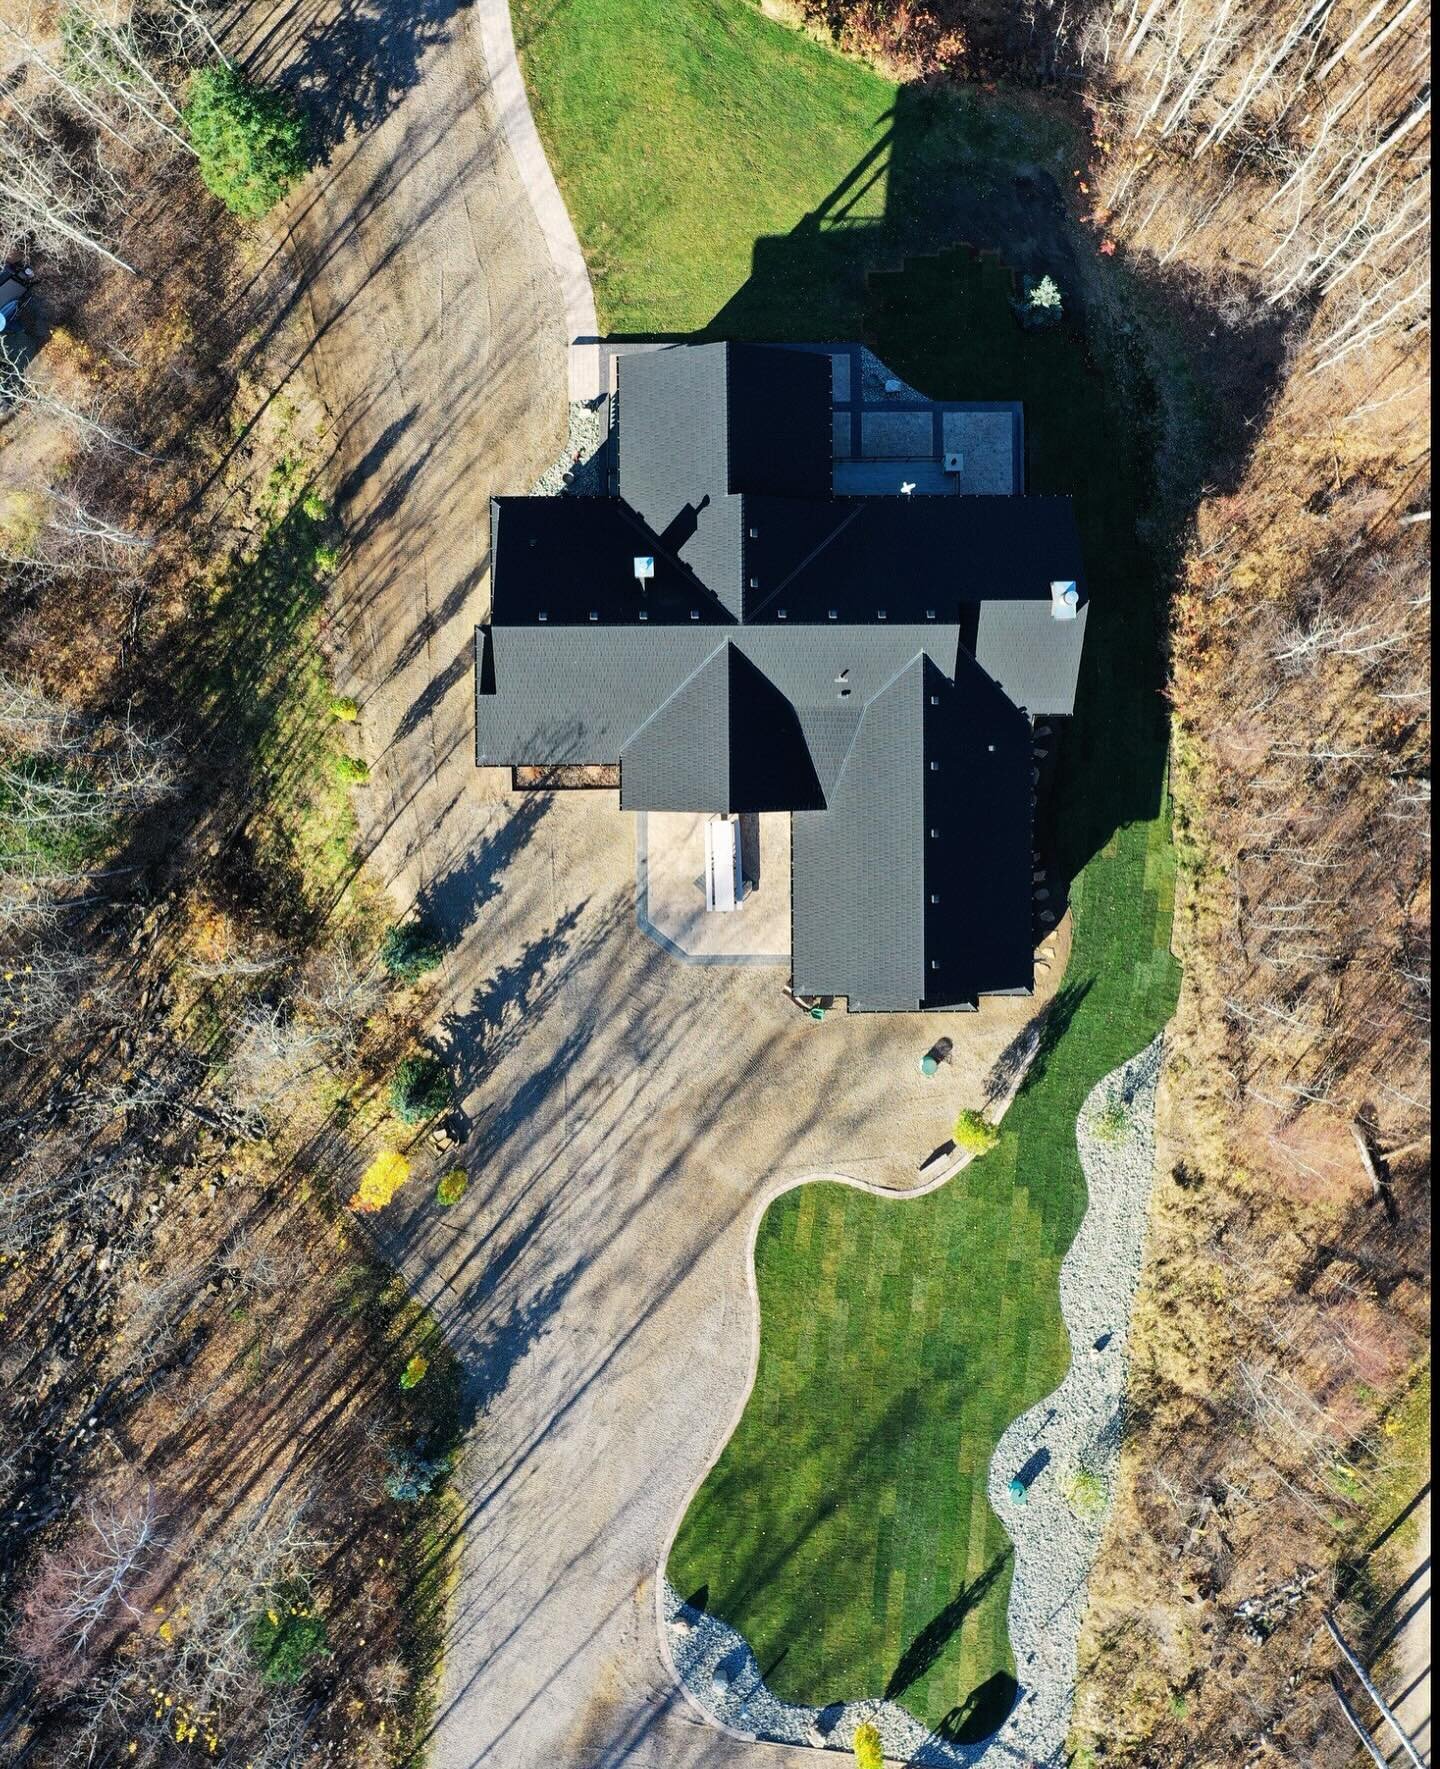 Bird&rsquo;s-eye view of our clients custom cabin 😍 

Cabins are a great place to relax and unwind. Whether you want to have a tranquil getaway or entertain friends and family, we can bring your vision to life! 

Let&rsquo;s start planning! Contact 